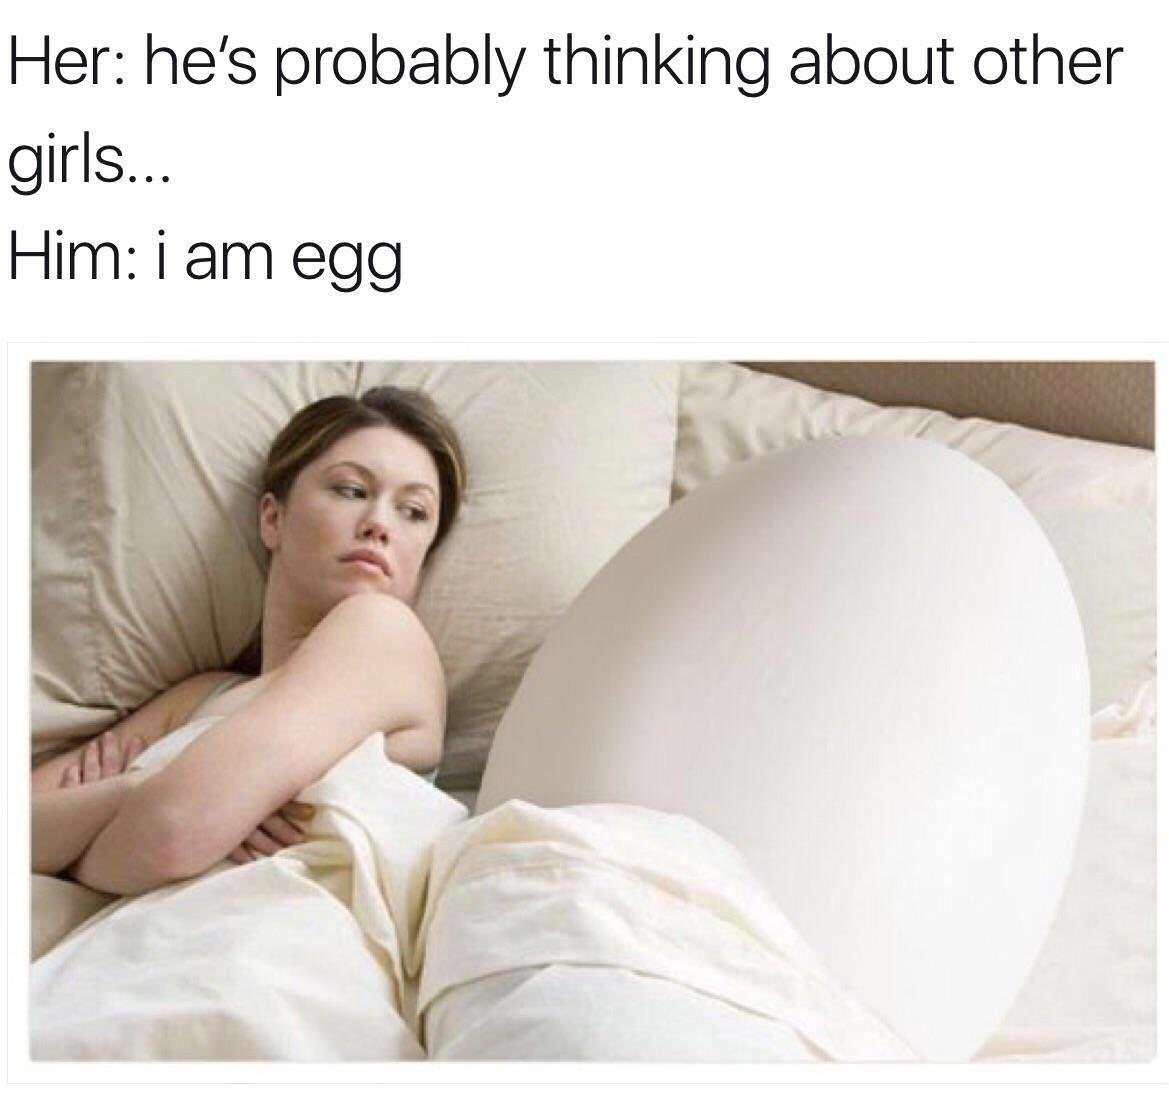 Pure eggstacy in bed.